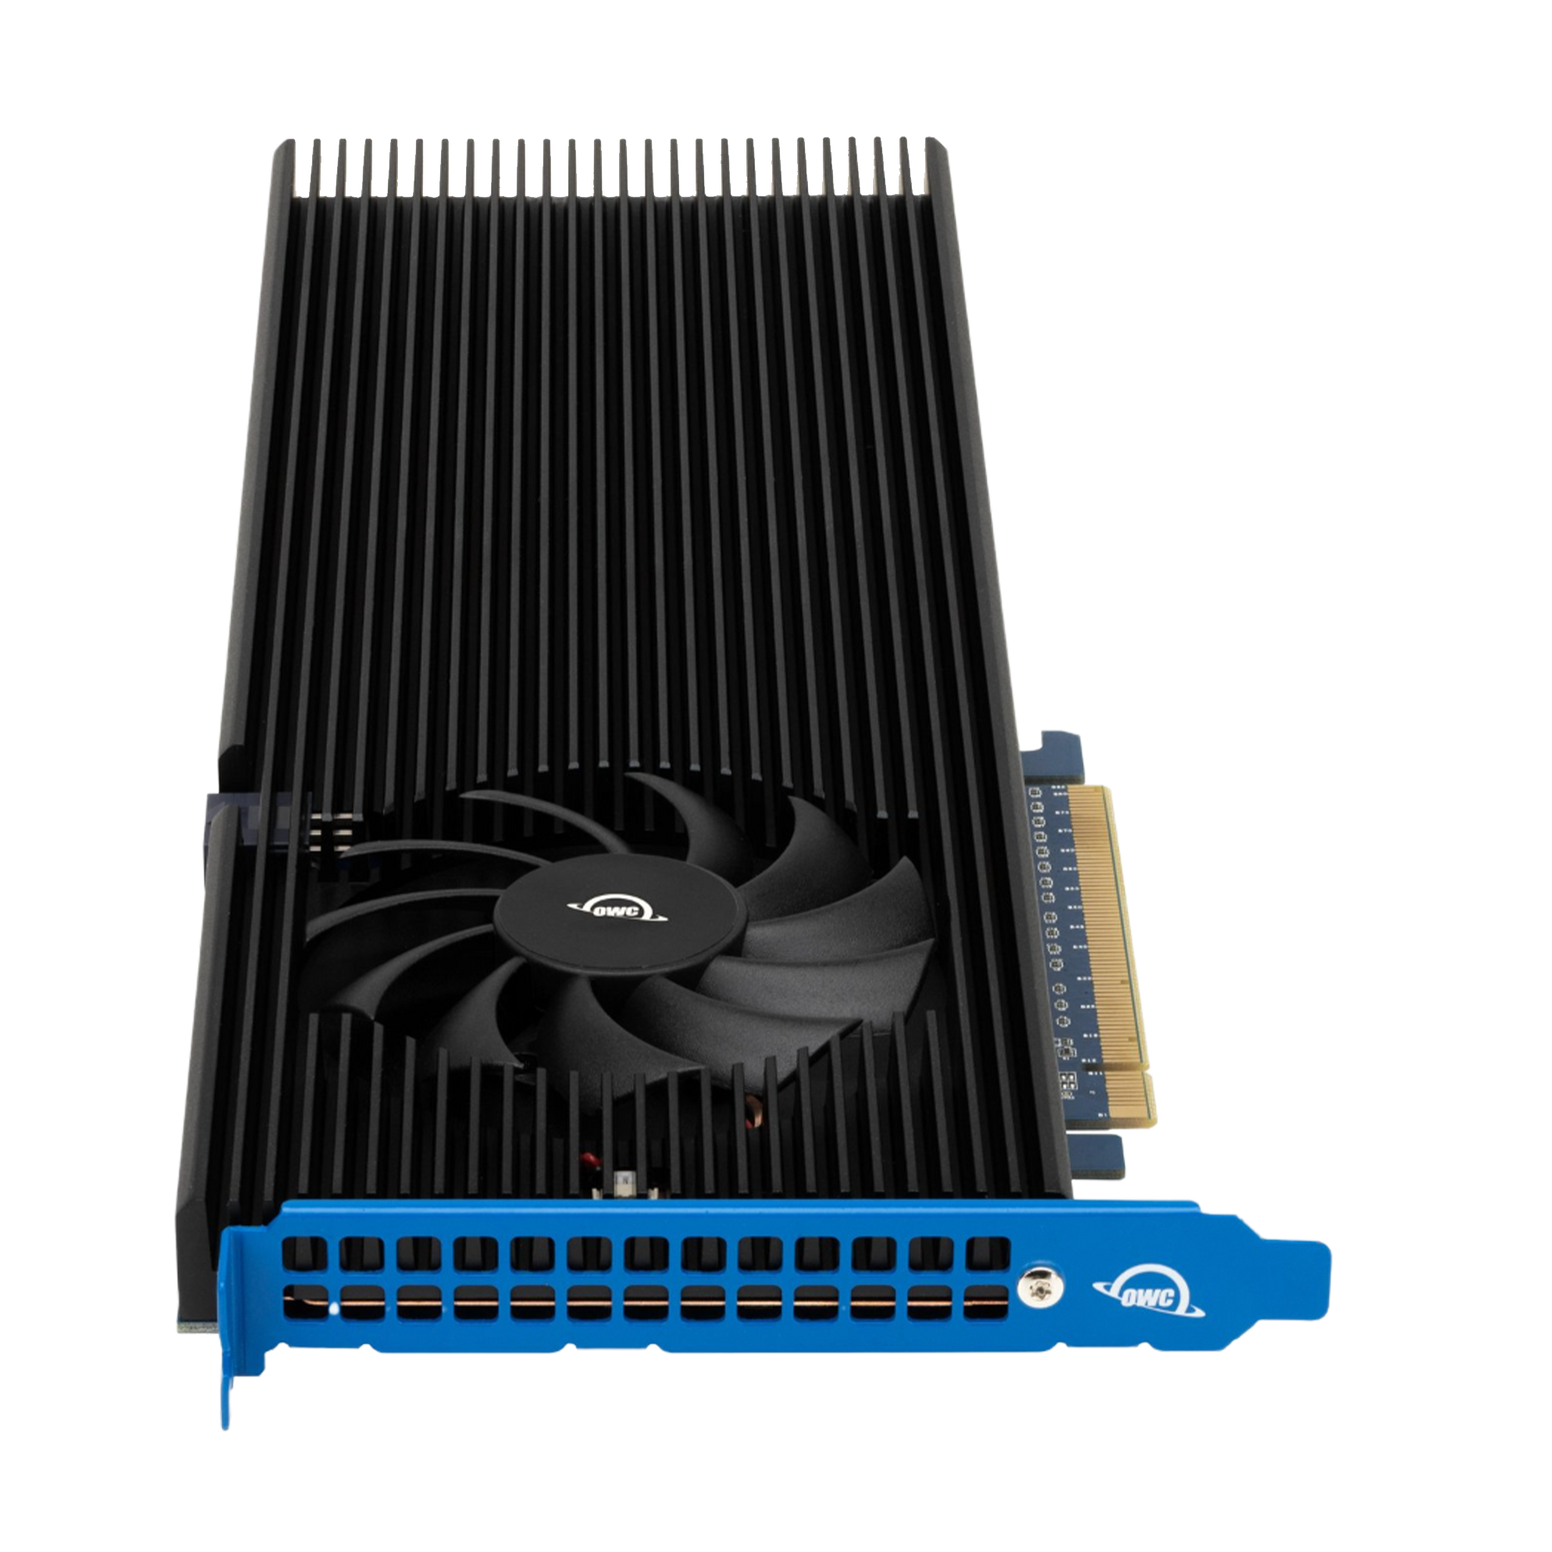 OWC Accelsior 8M2 Eight-Slot NVMe M.2 SSD to PCIe 4.0 Expansion Card